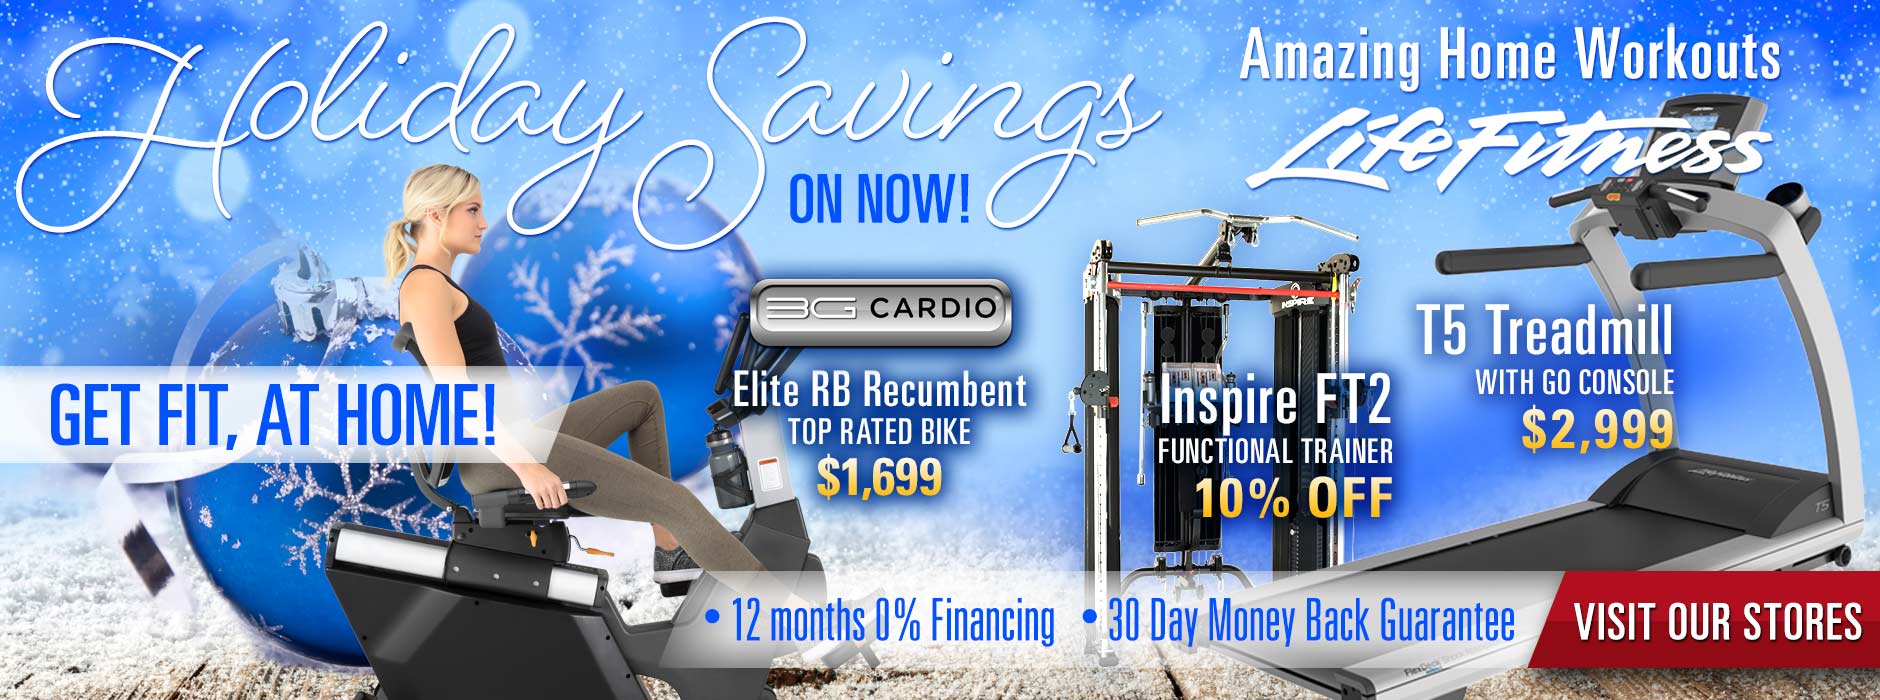 At Home Fitness Holiday Savings Sale Has Great Deals